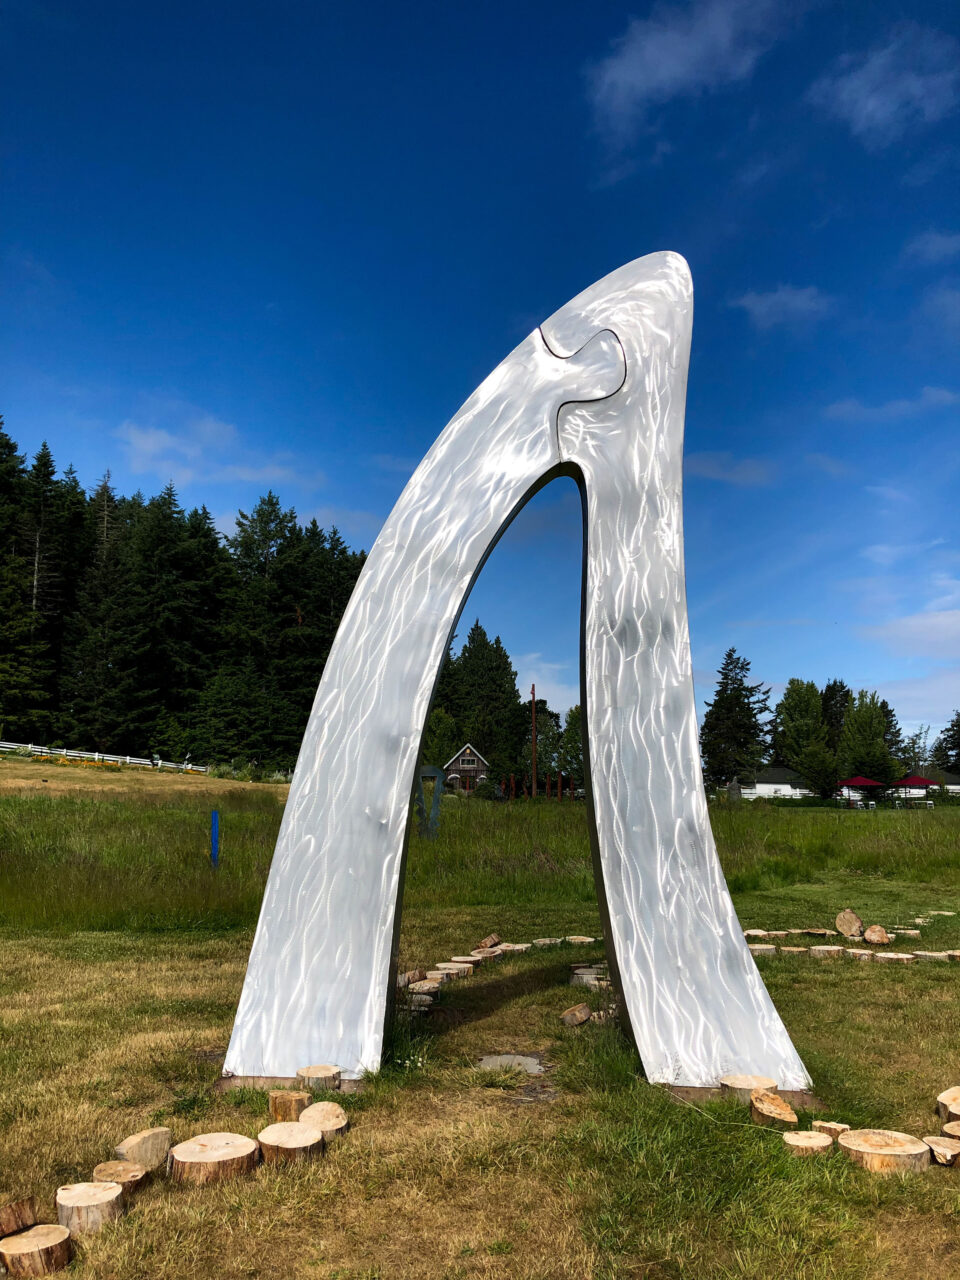 The sculpture park in Roche Harbor is a fantastic place to enjoy some local art, like this metal whale fin.